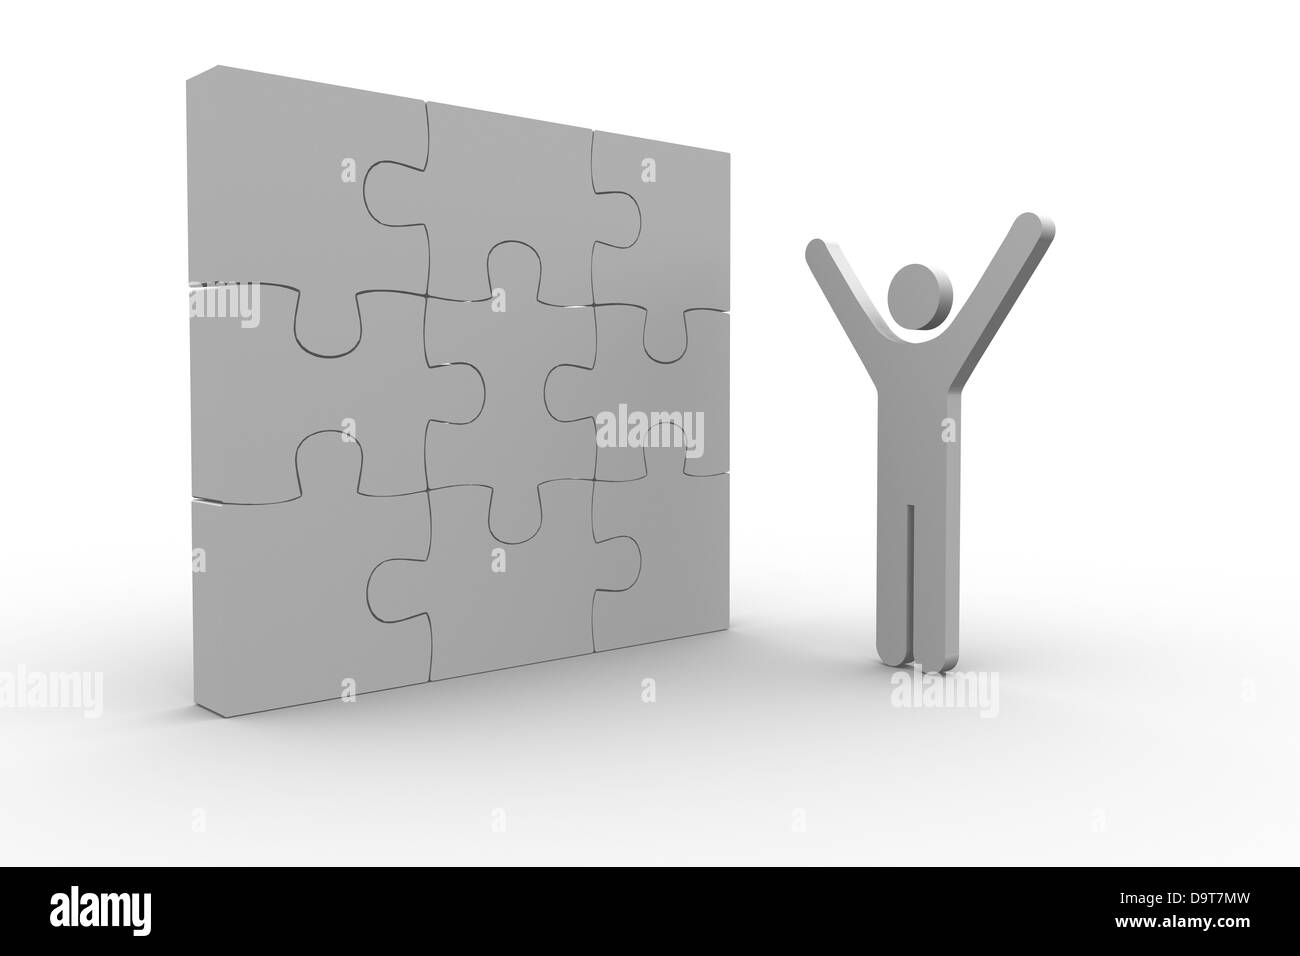 White human figure raising arms next to solved jigsaw puzzle Stock Photo